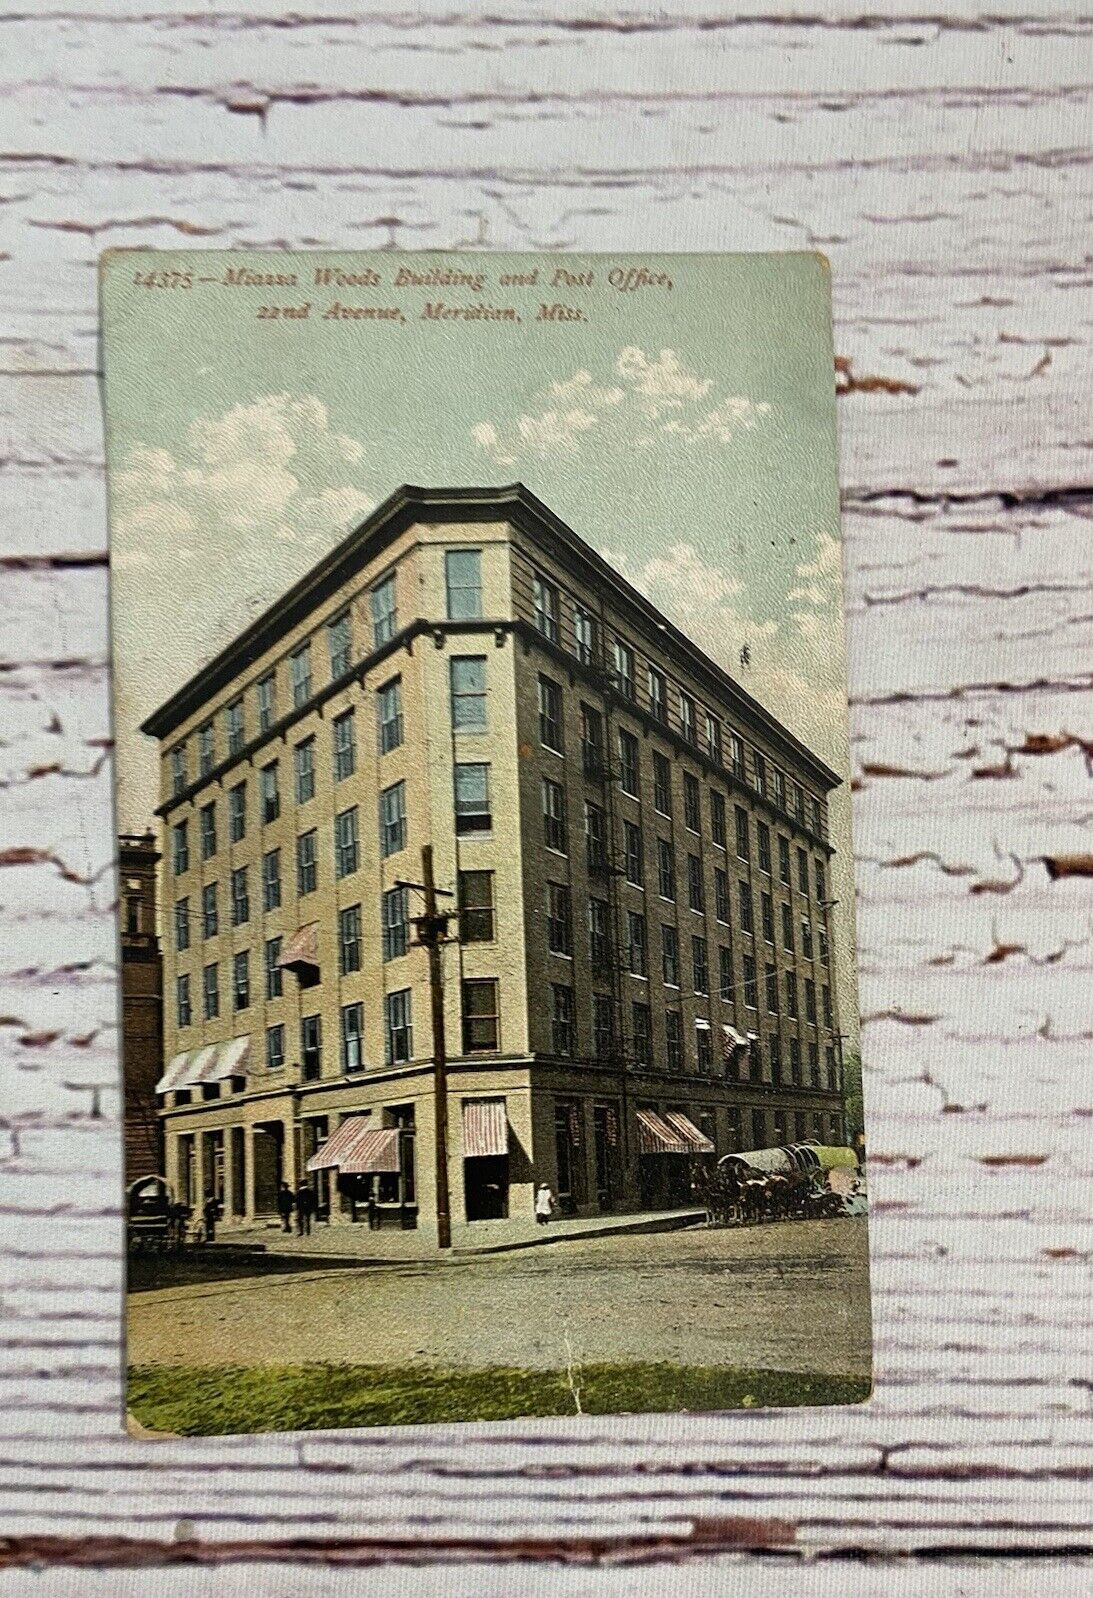 1908 Meridian Mississippi Postcard Miazza Woods Building & Post Office No Stamp